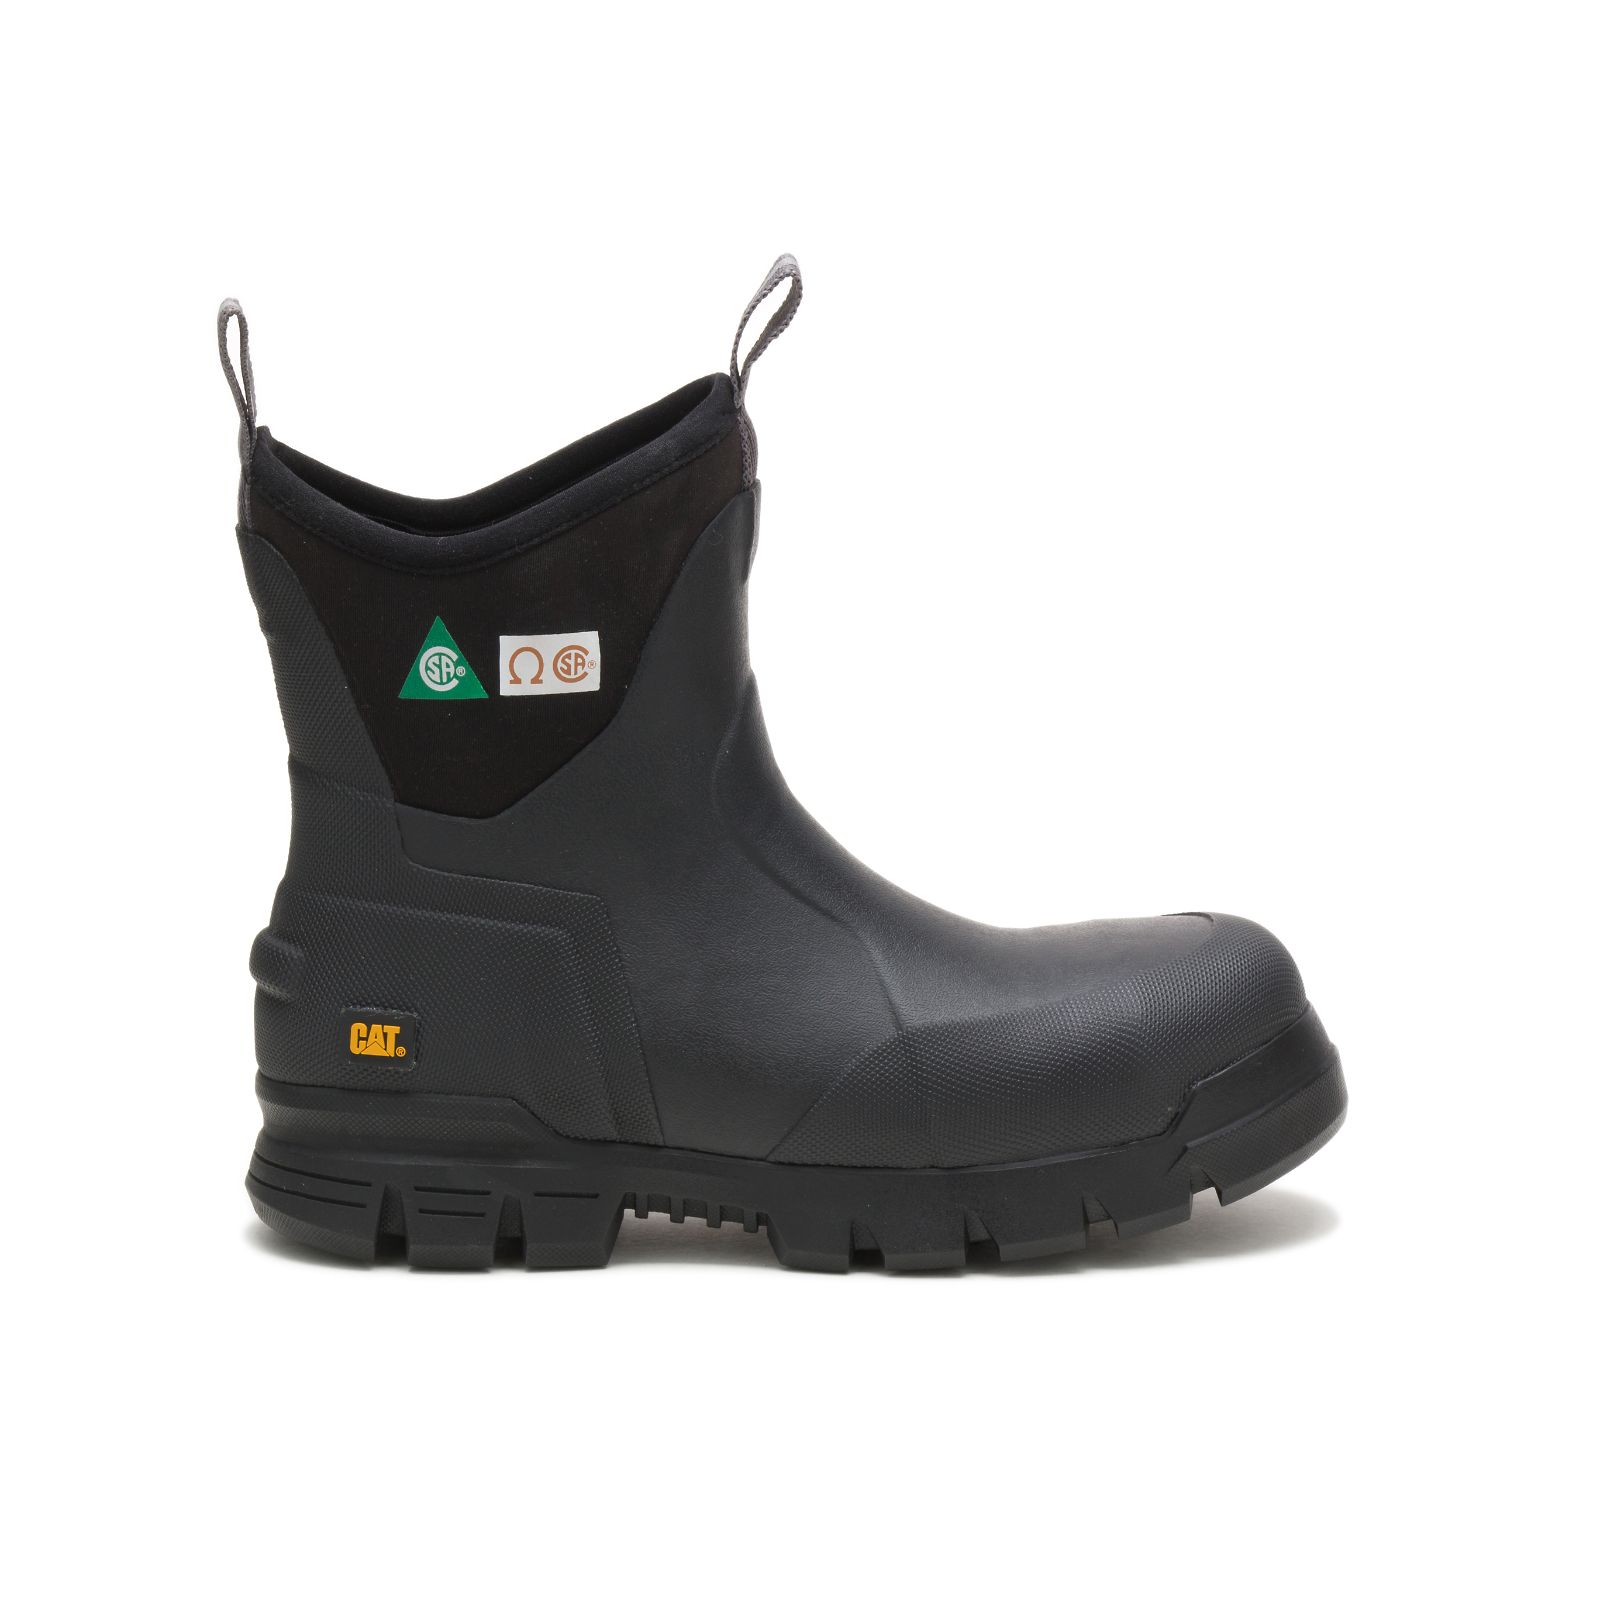 Womens Caterpillar Stormers 6" Steel Toe Csa Rubber Boots Black Malaysia Outlet (CYJTW9850)